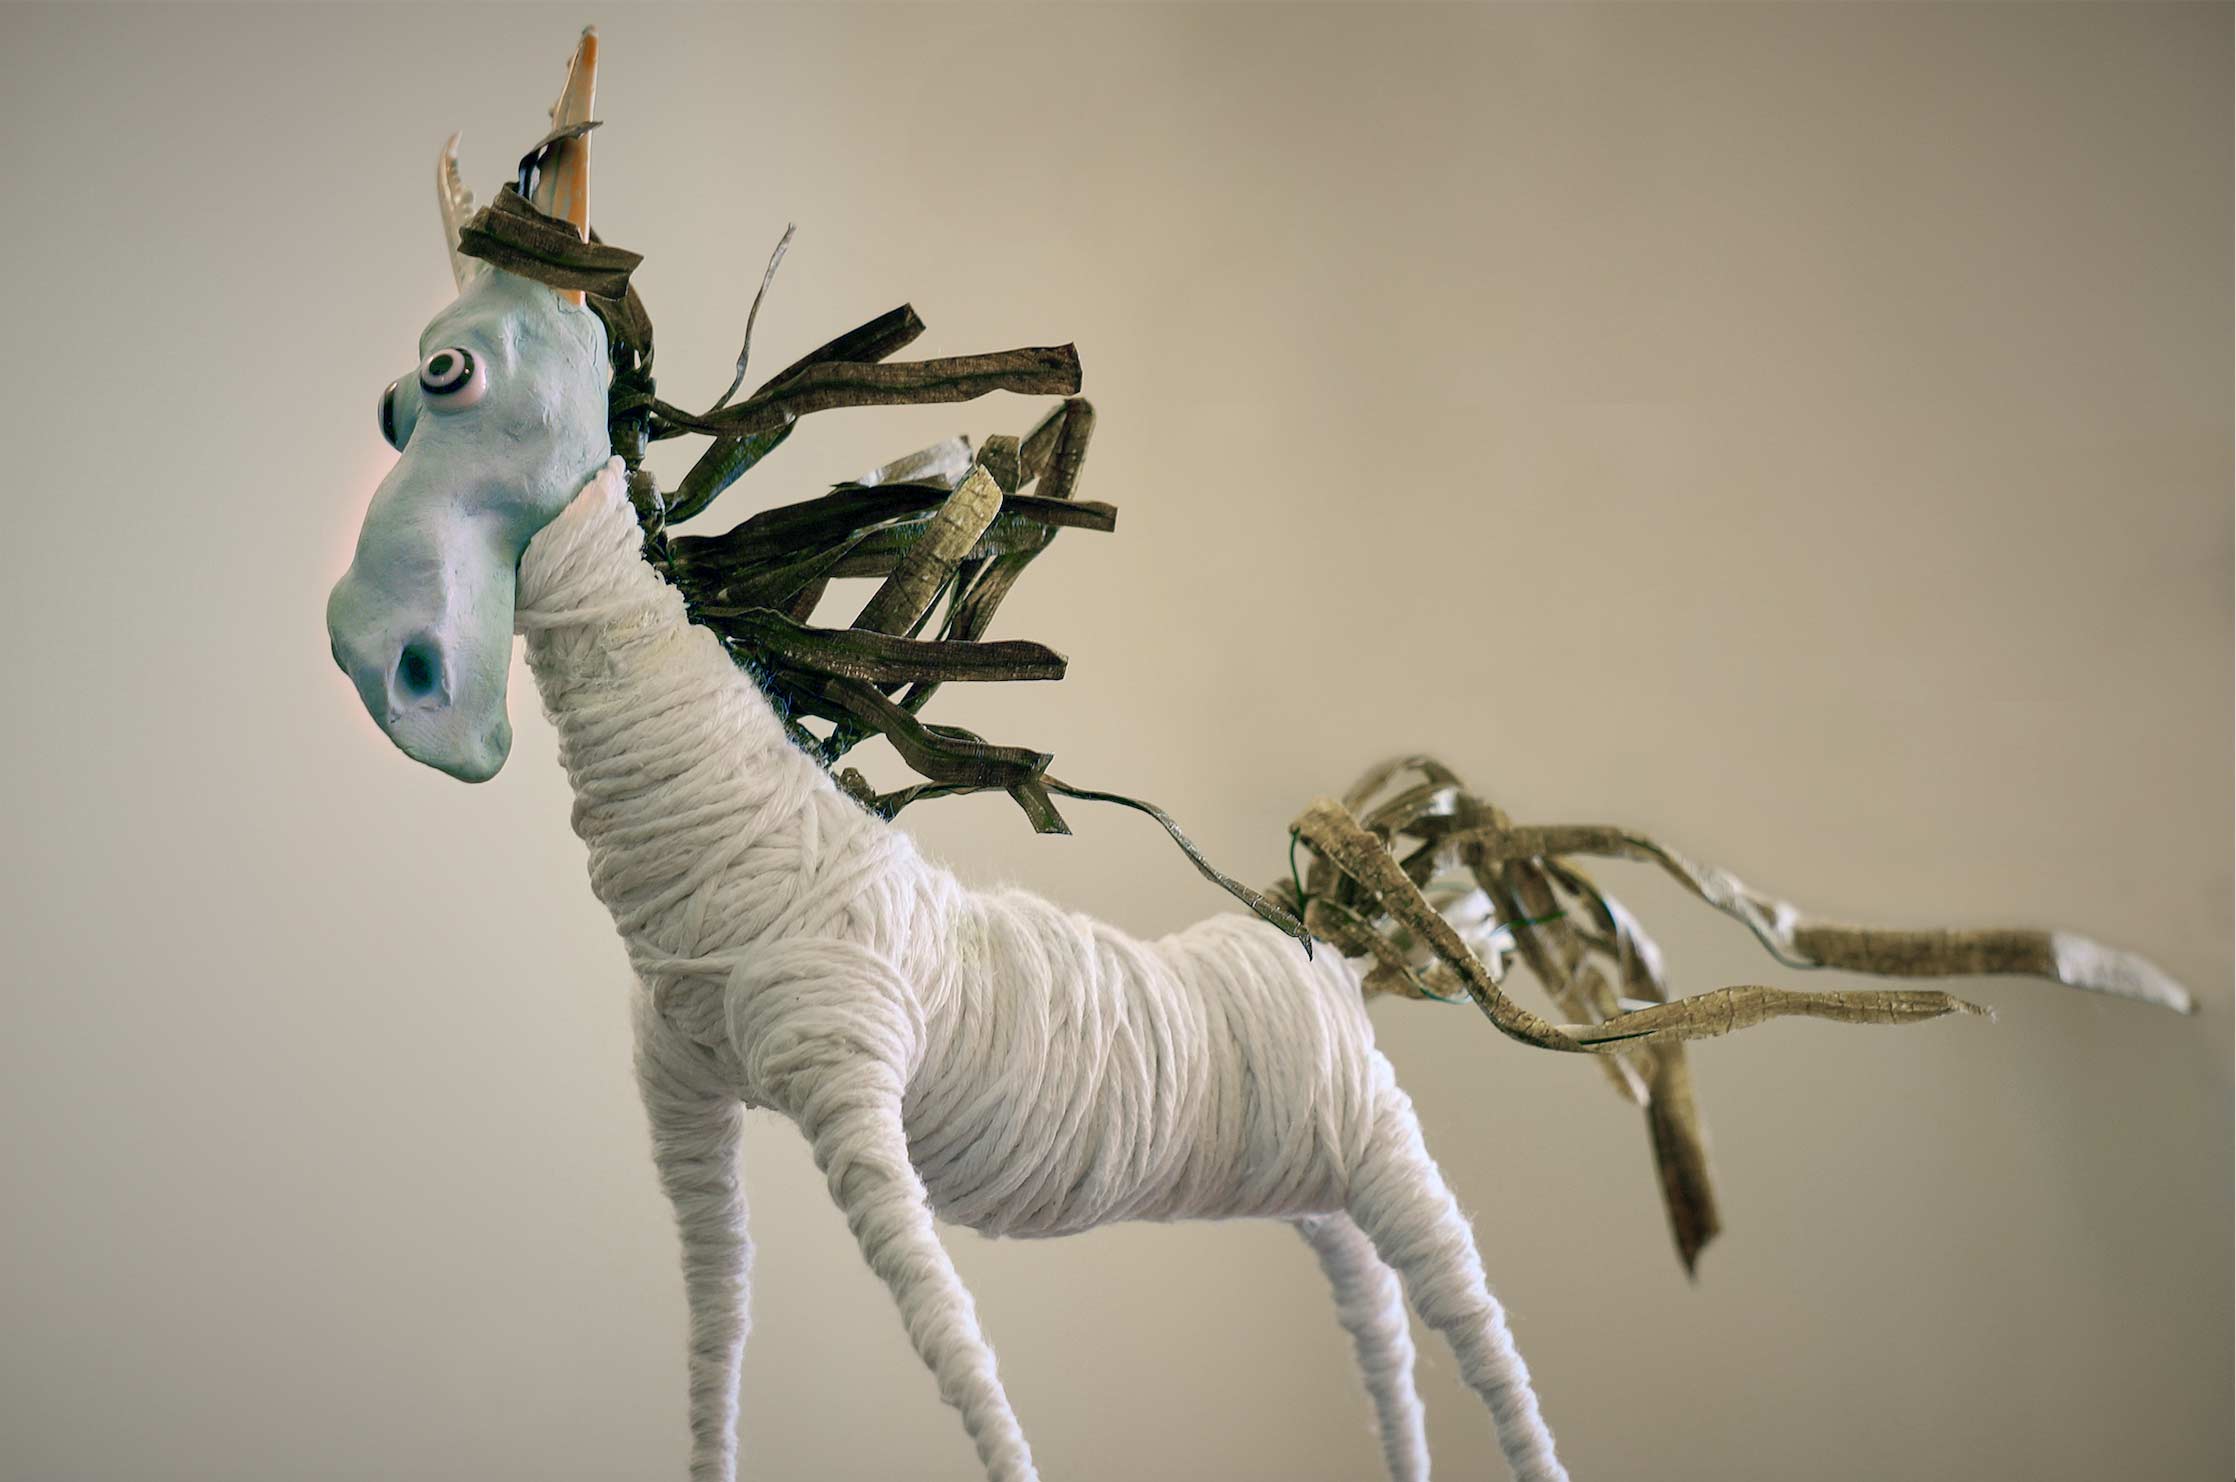 A stop motion horse character. His face and hooves are sculpted in blue air-dry clay and has a body of white cotton string.